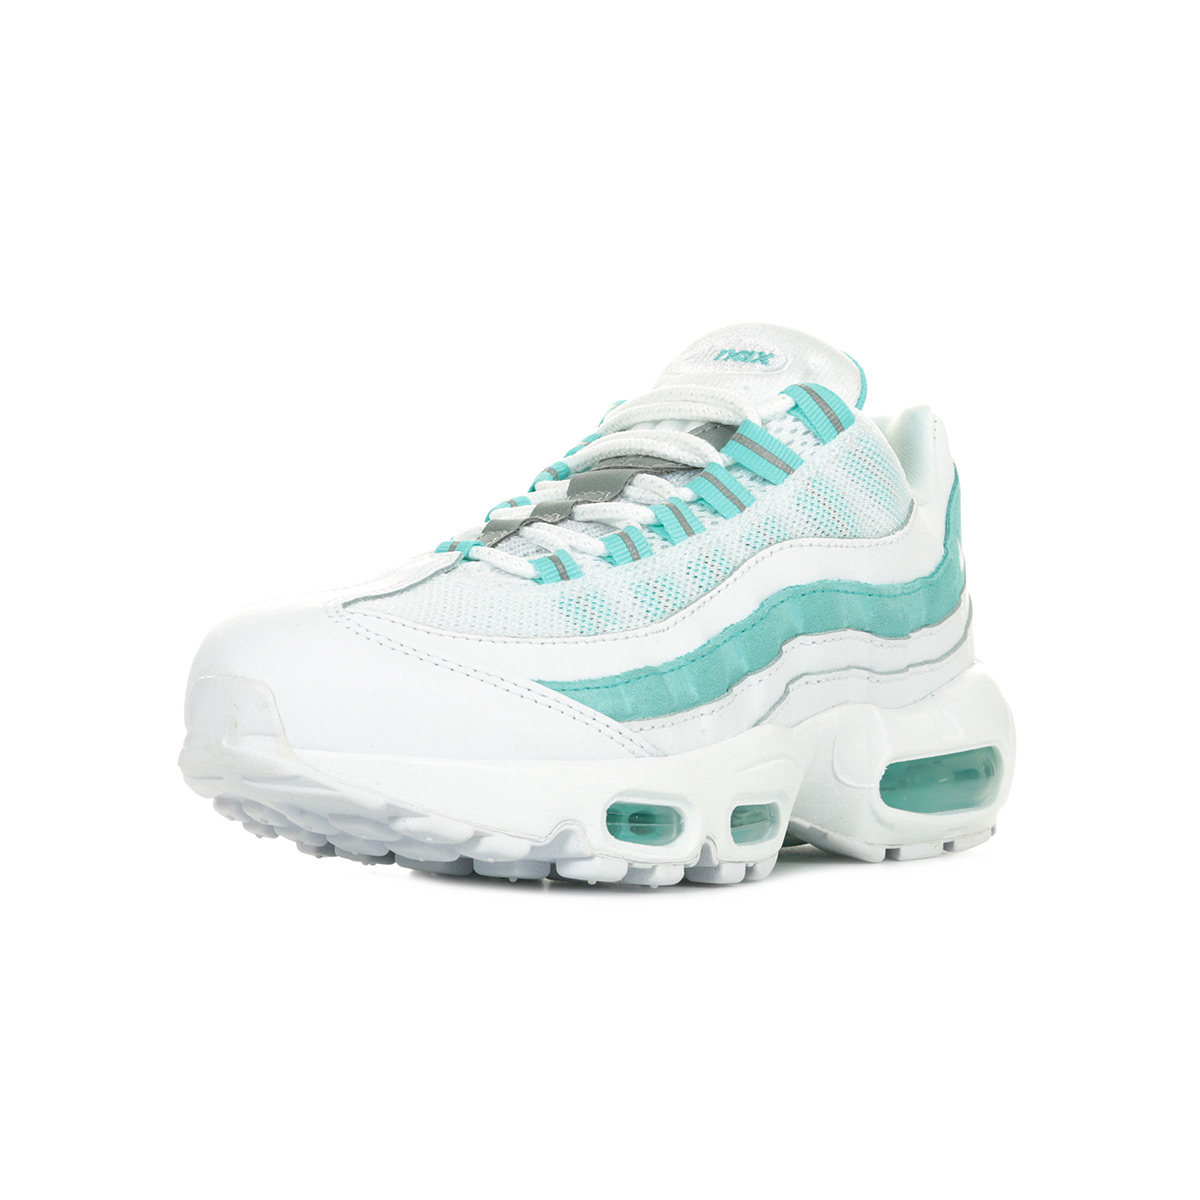 air max 95 turquoise